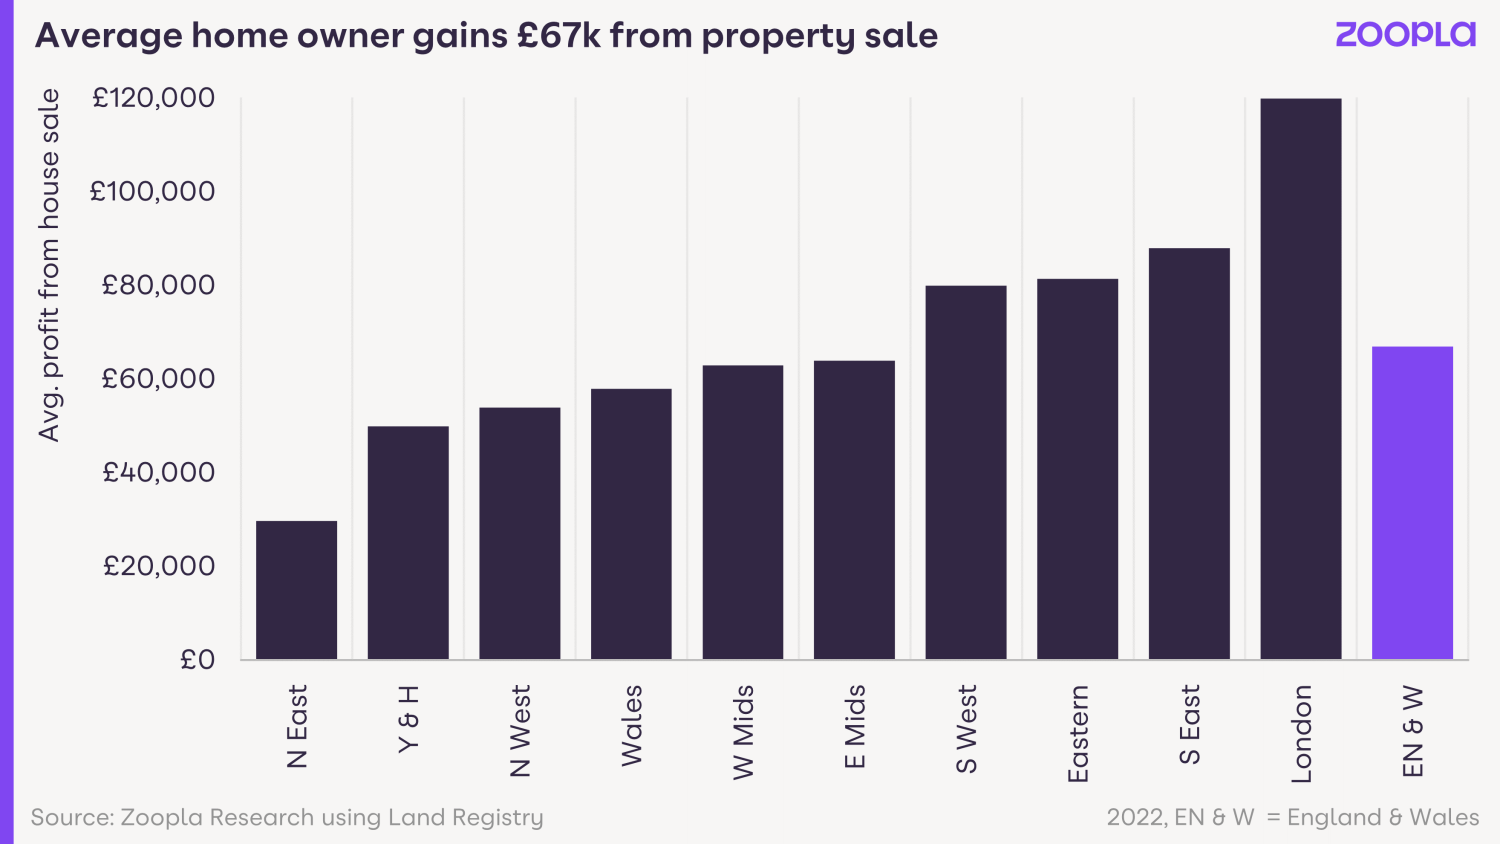 Table showing the average profit from house sale in 2022